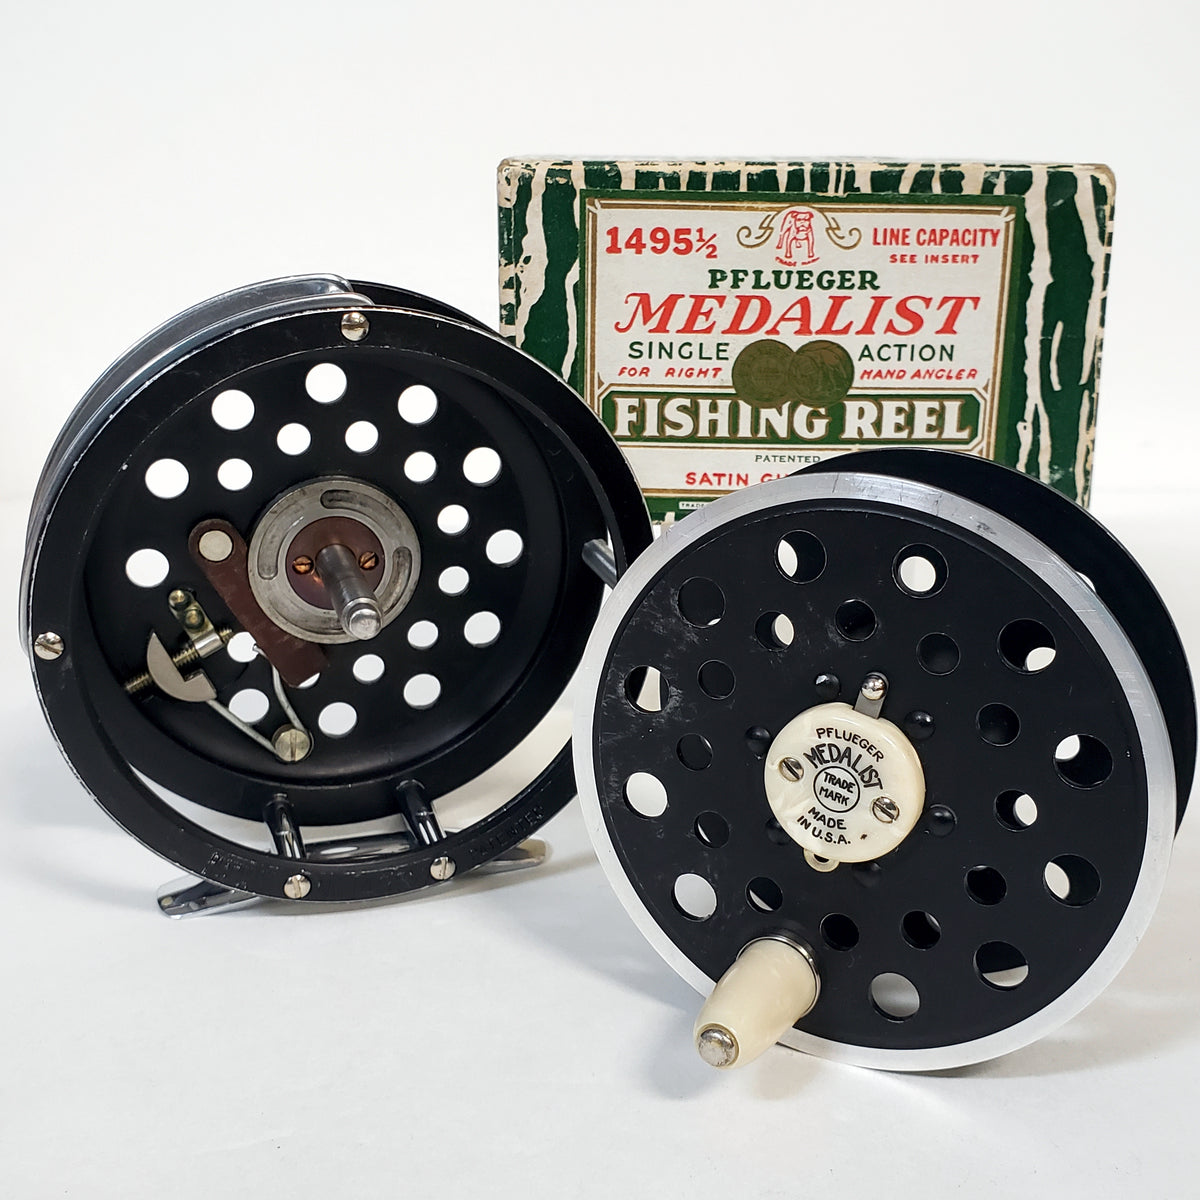 Looking for information about Pflueger Medalist spinning reel